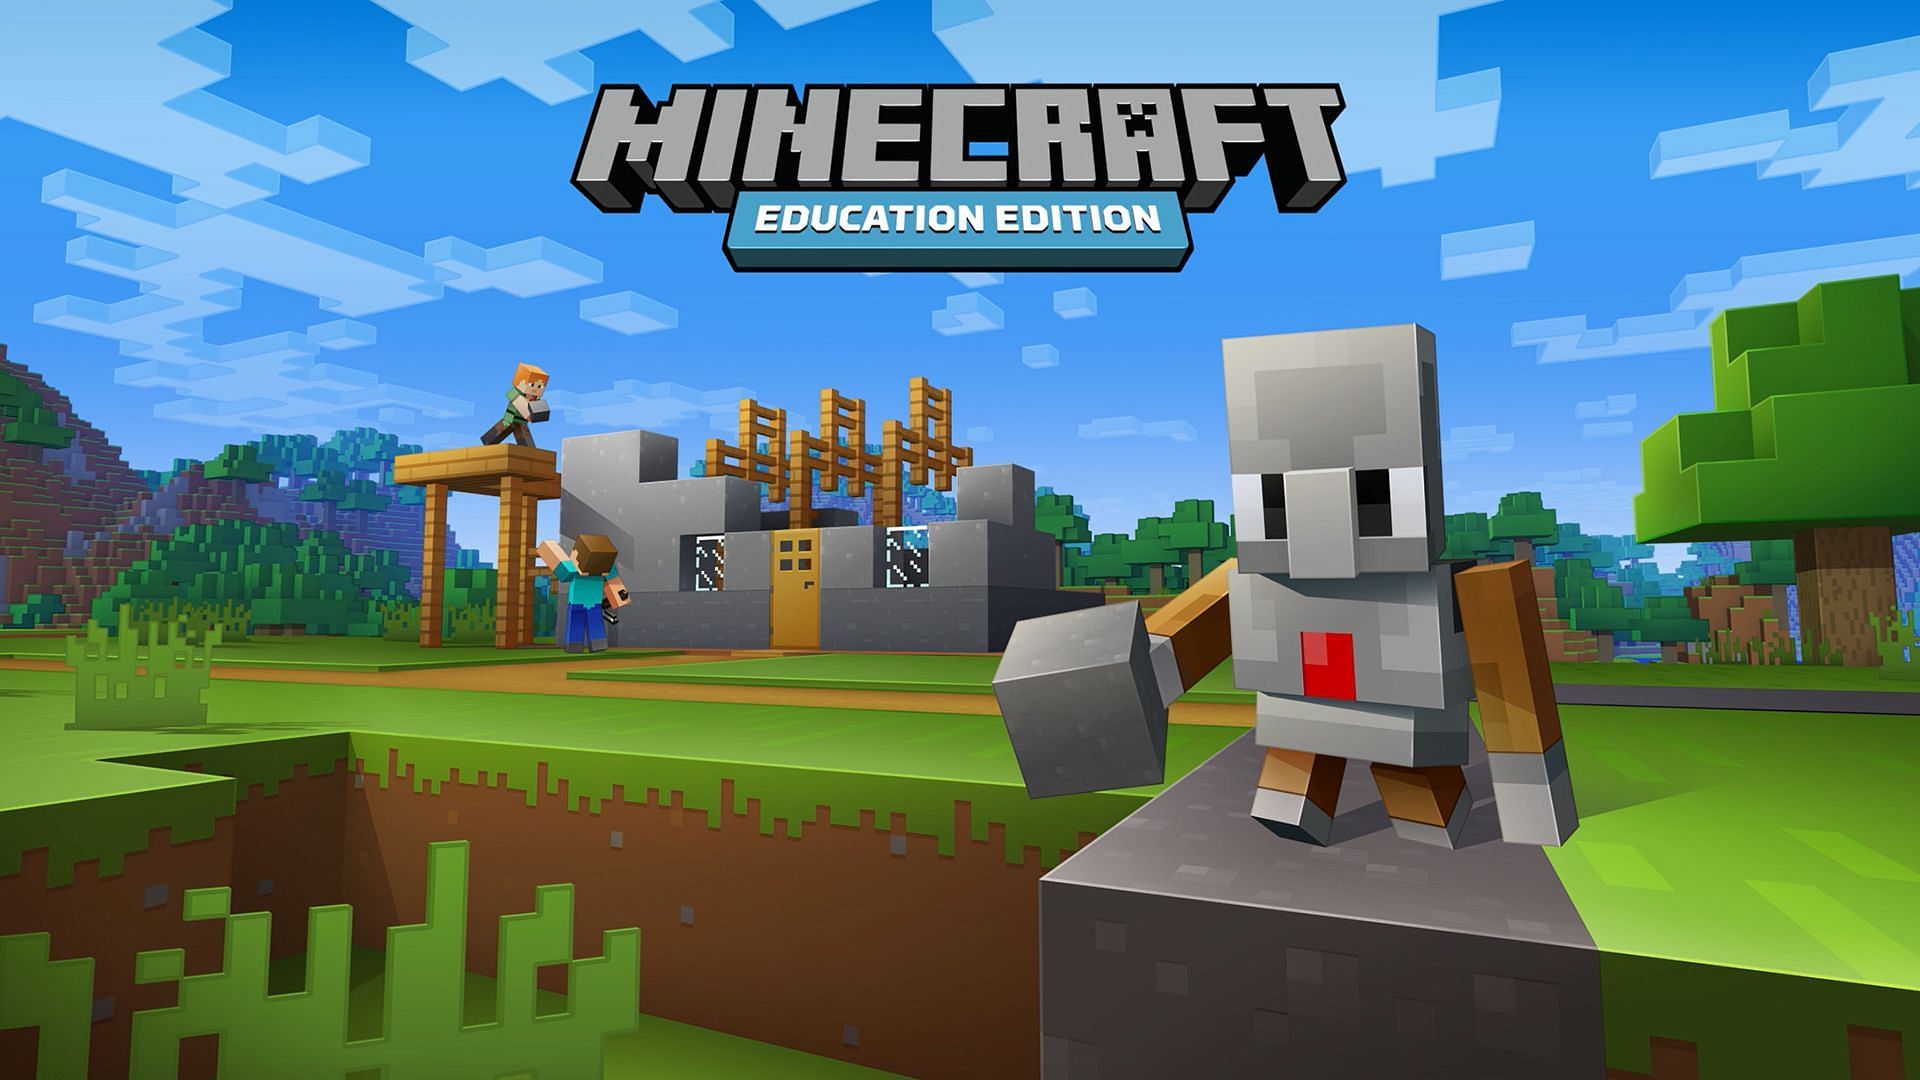 Some official art for Minecraft Education Edition (Image via Mojang)